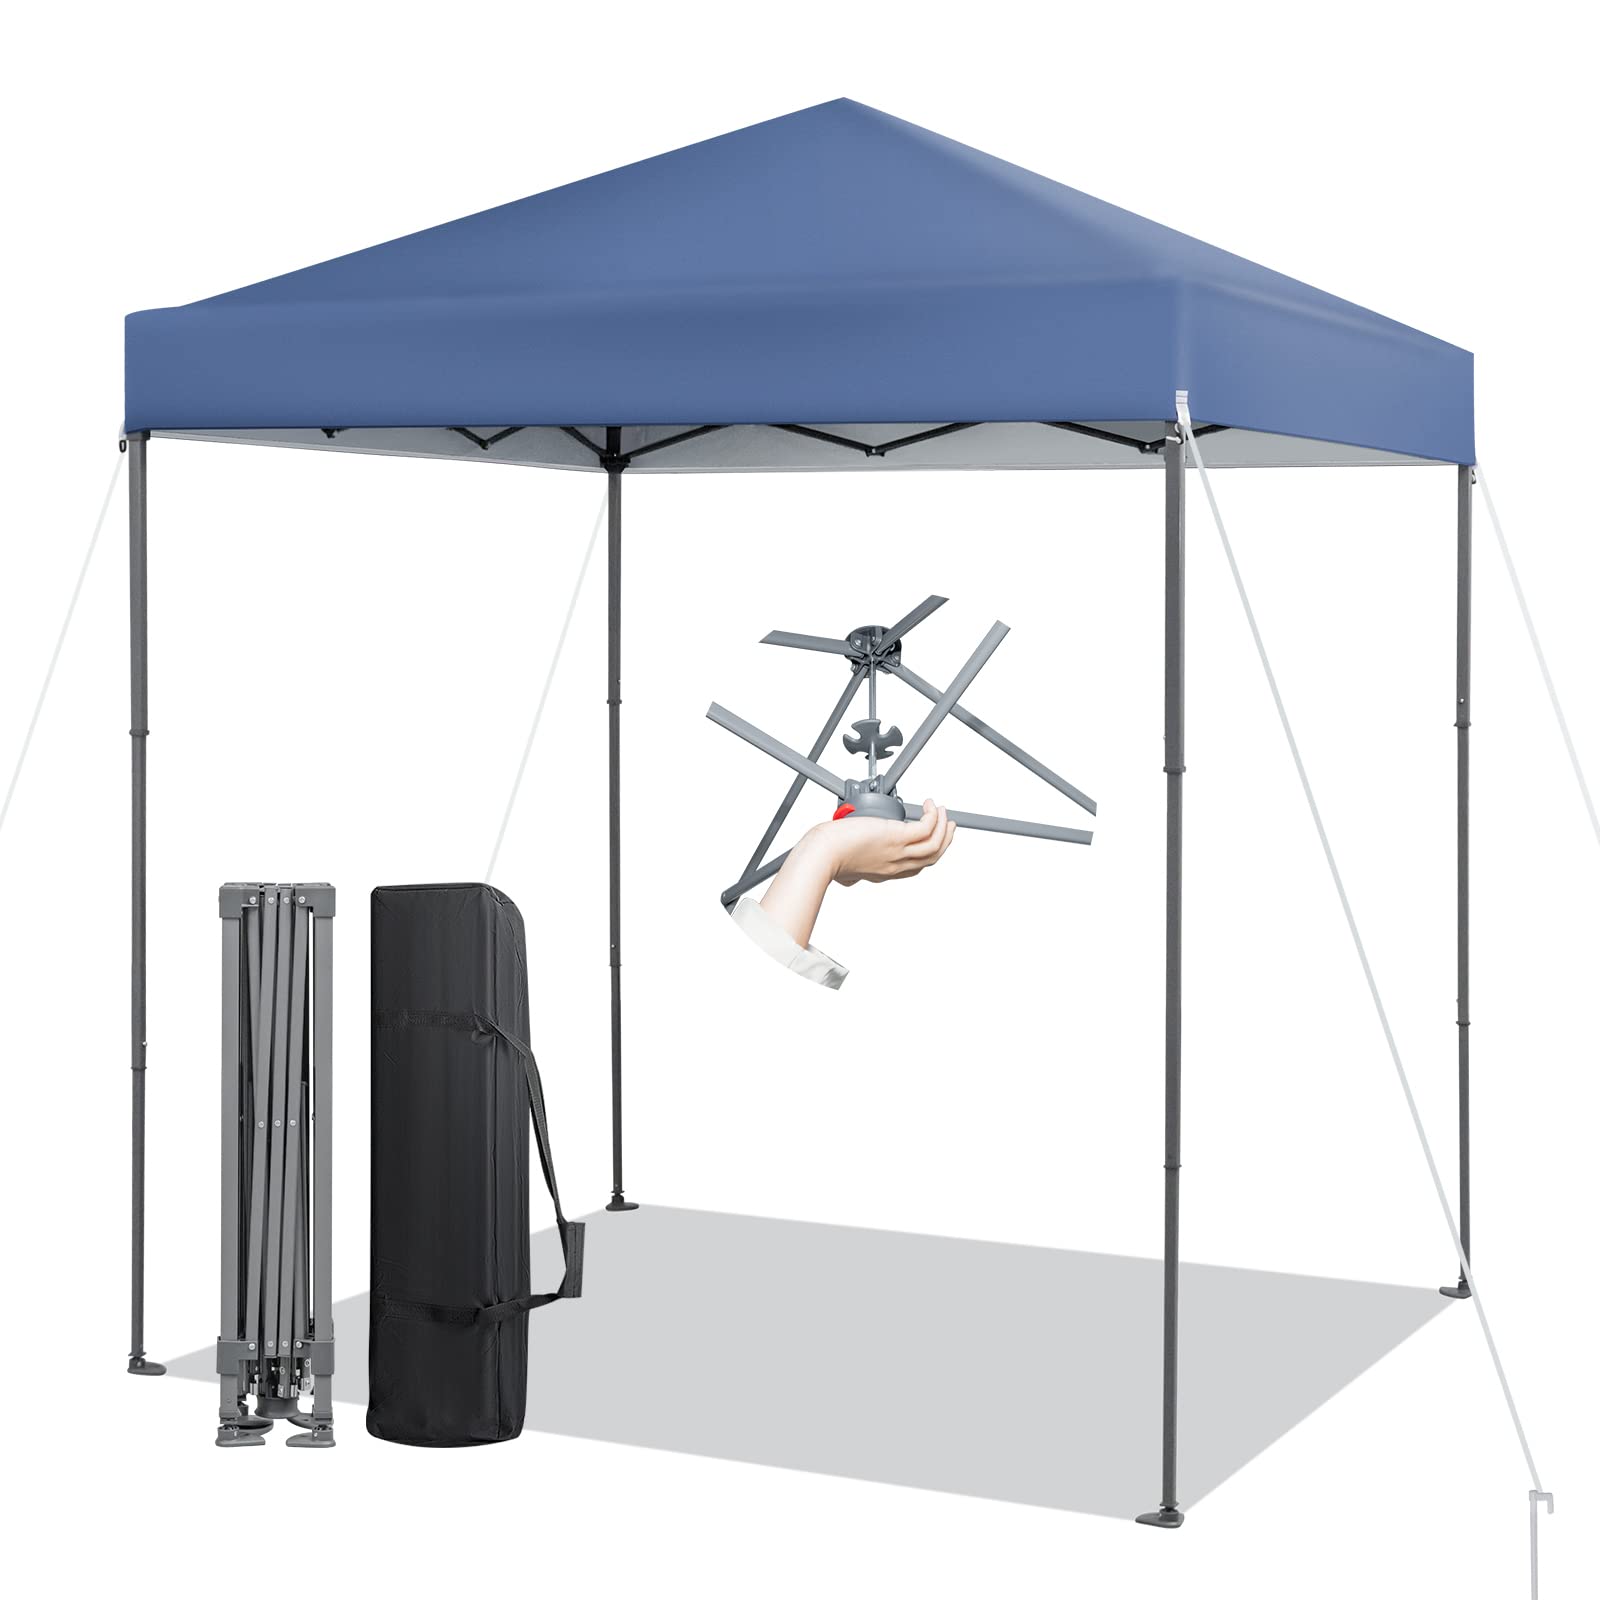 6.6 ft x 6.6 ft Outdoor Pop-up Instant Canopy Tent - Tangkula